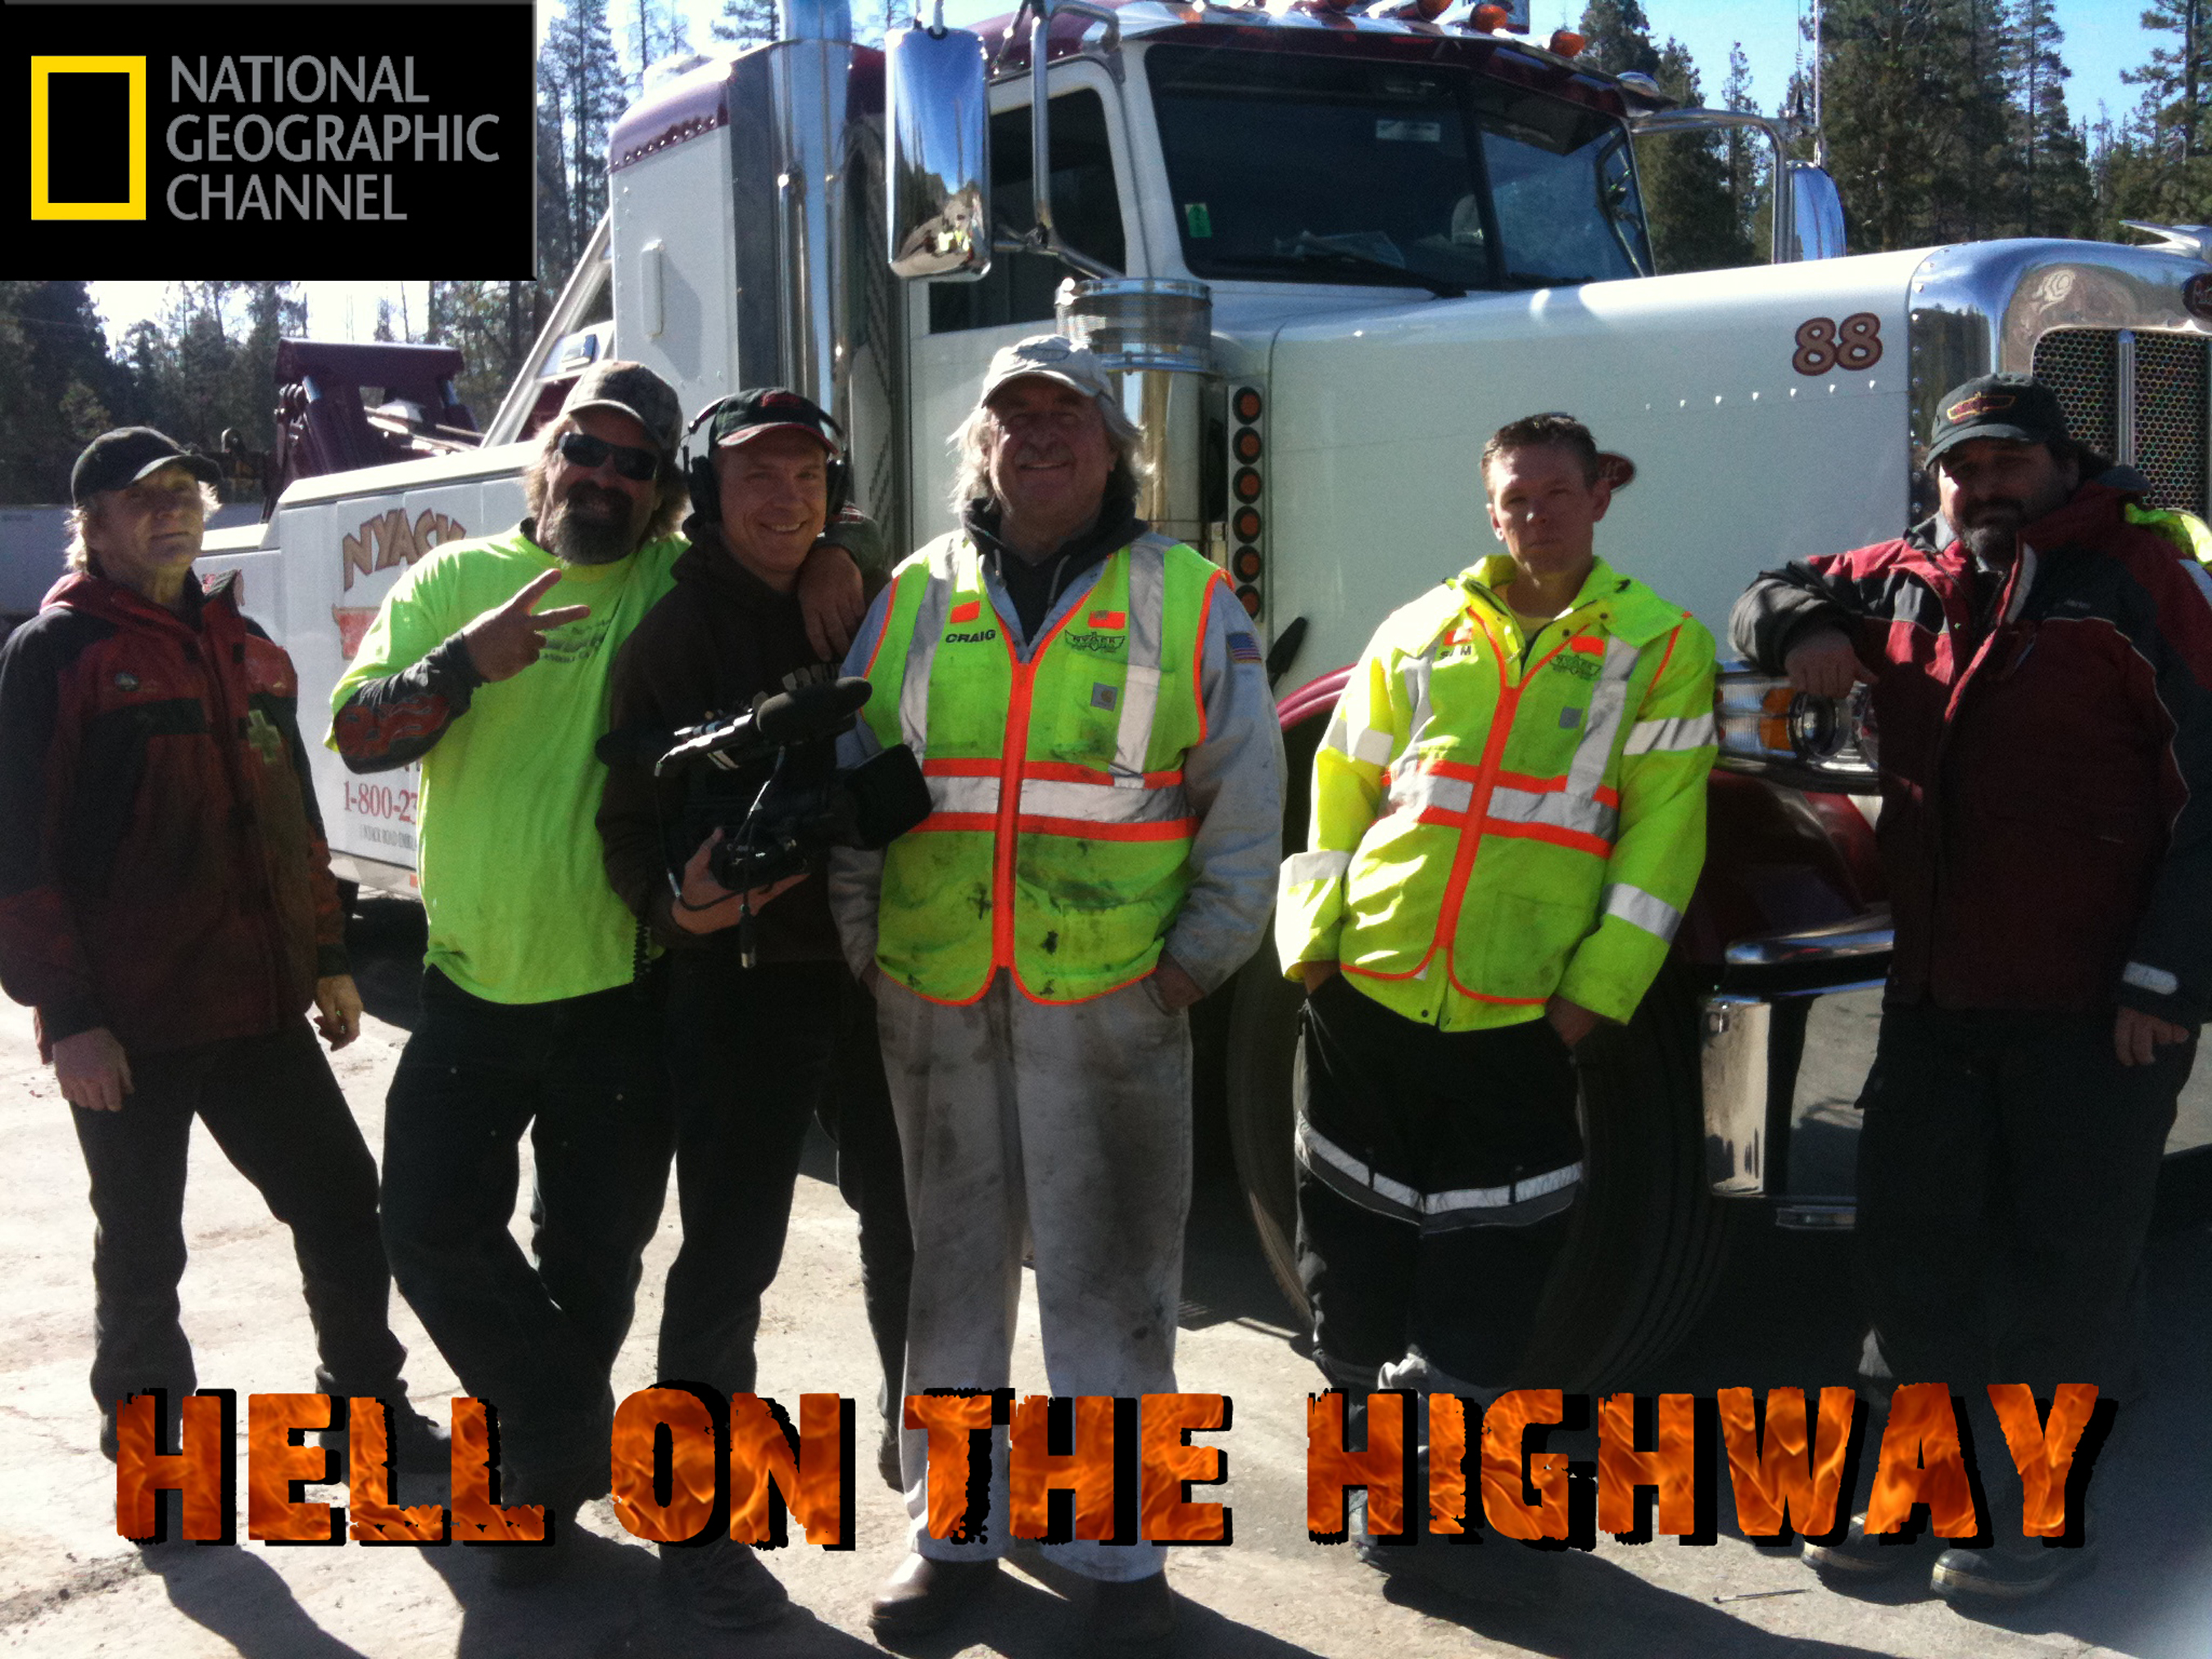 Producer Craig Santy has a lighthearted moment with the cast from Nyack Towing on the set of the National Geographic Channel's 